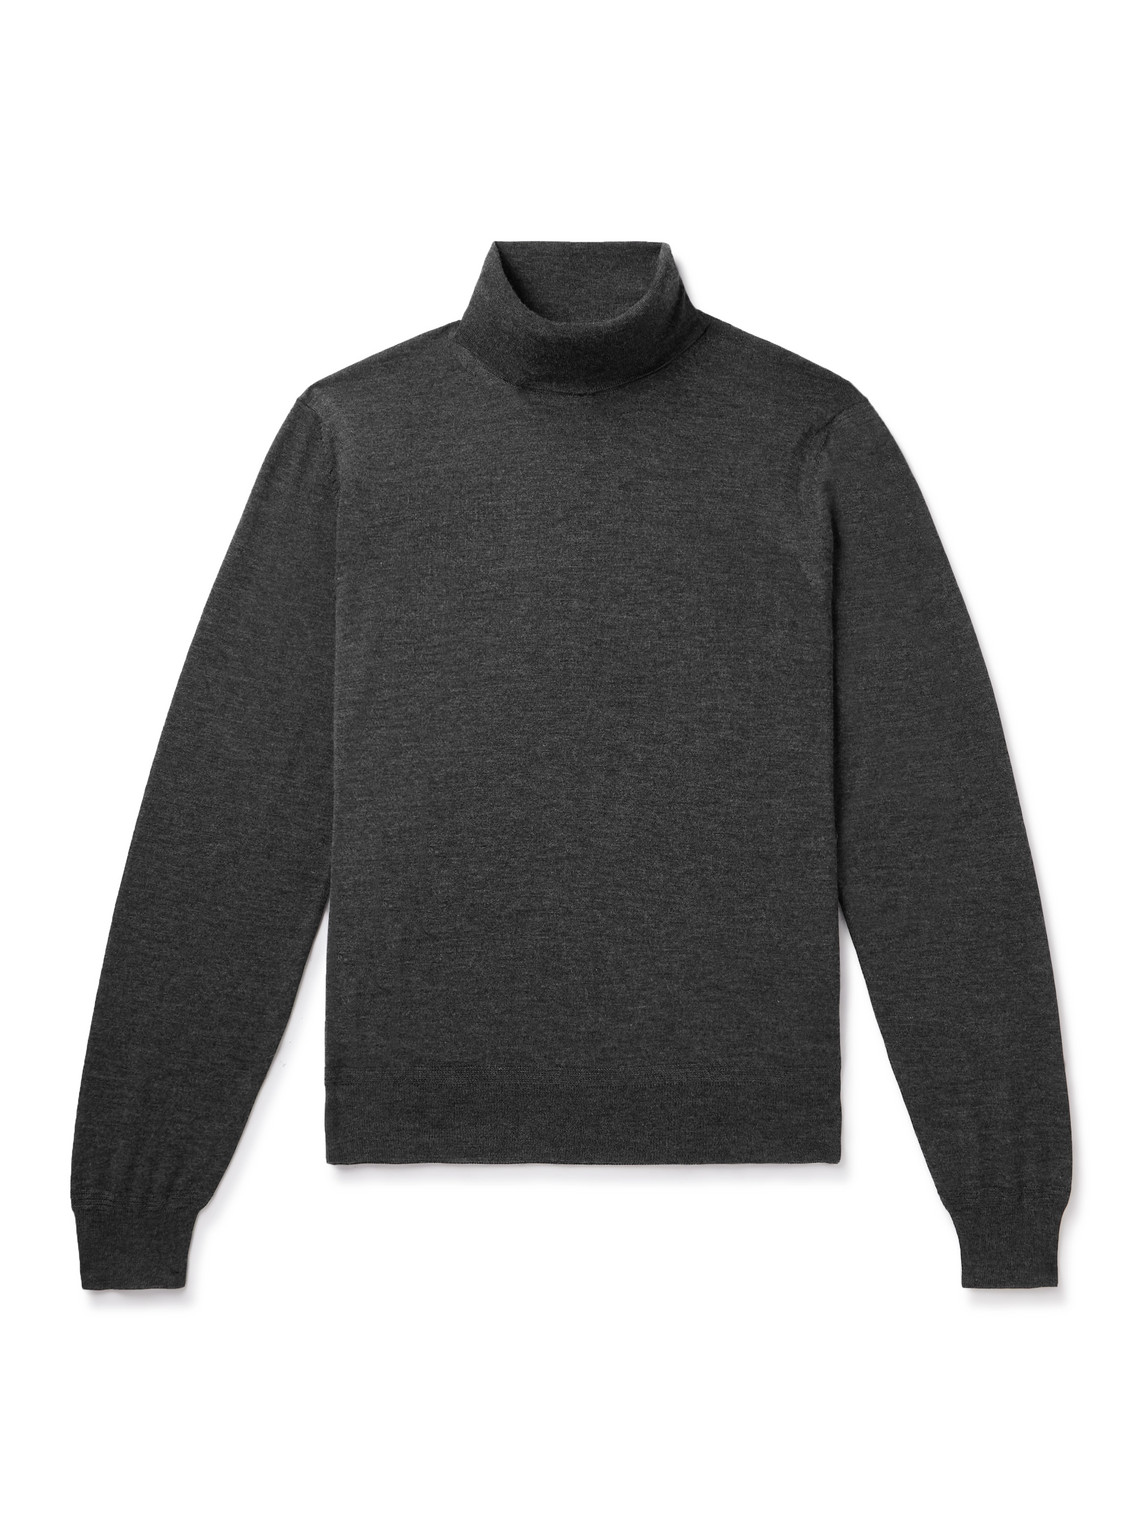 TOM FORD - Cashmere and Silk-Blend Rollneck Sweater - Men - Gray - IT 56 von TOM FORD